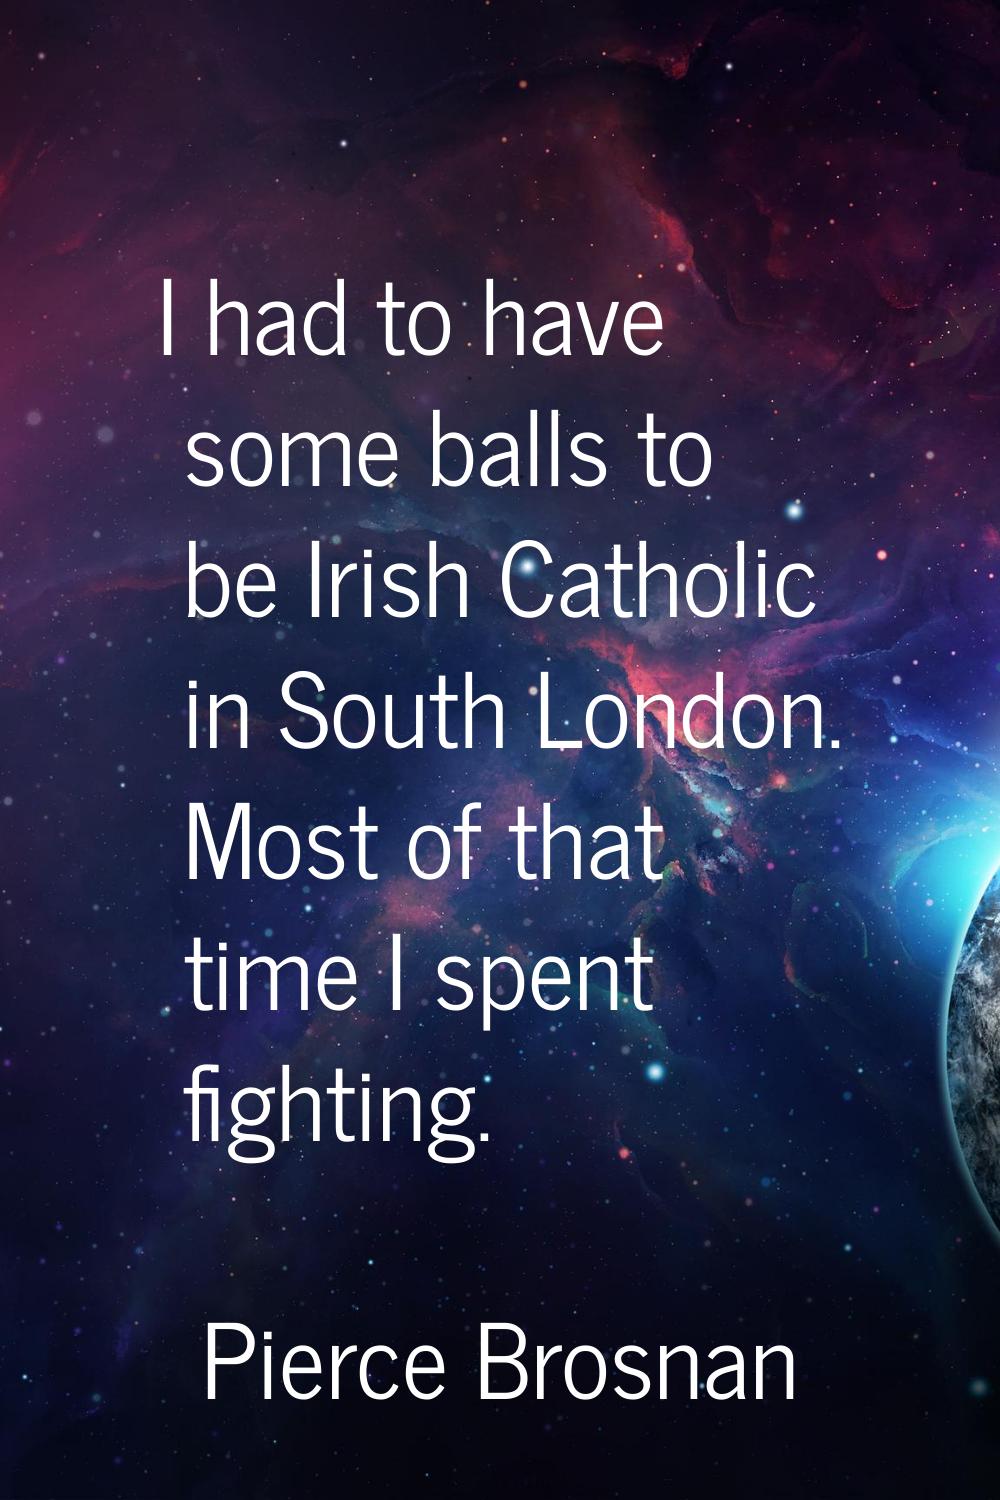 I had to have some balls to be Irish Catholic in South London. Most of that time I spent fighting.